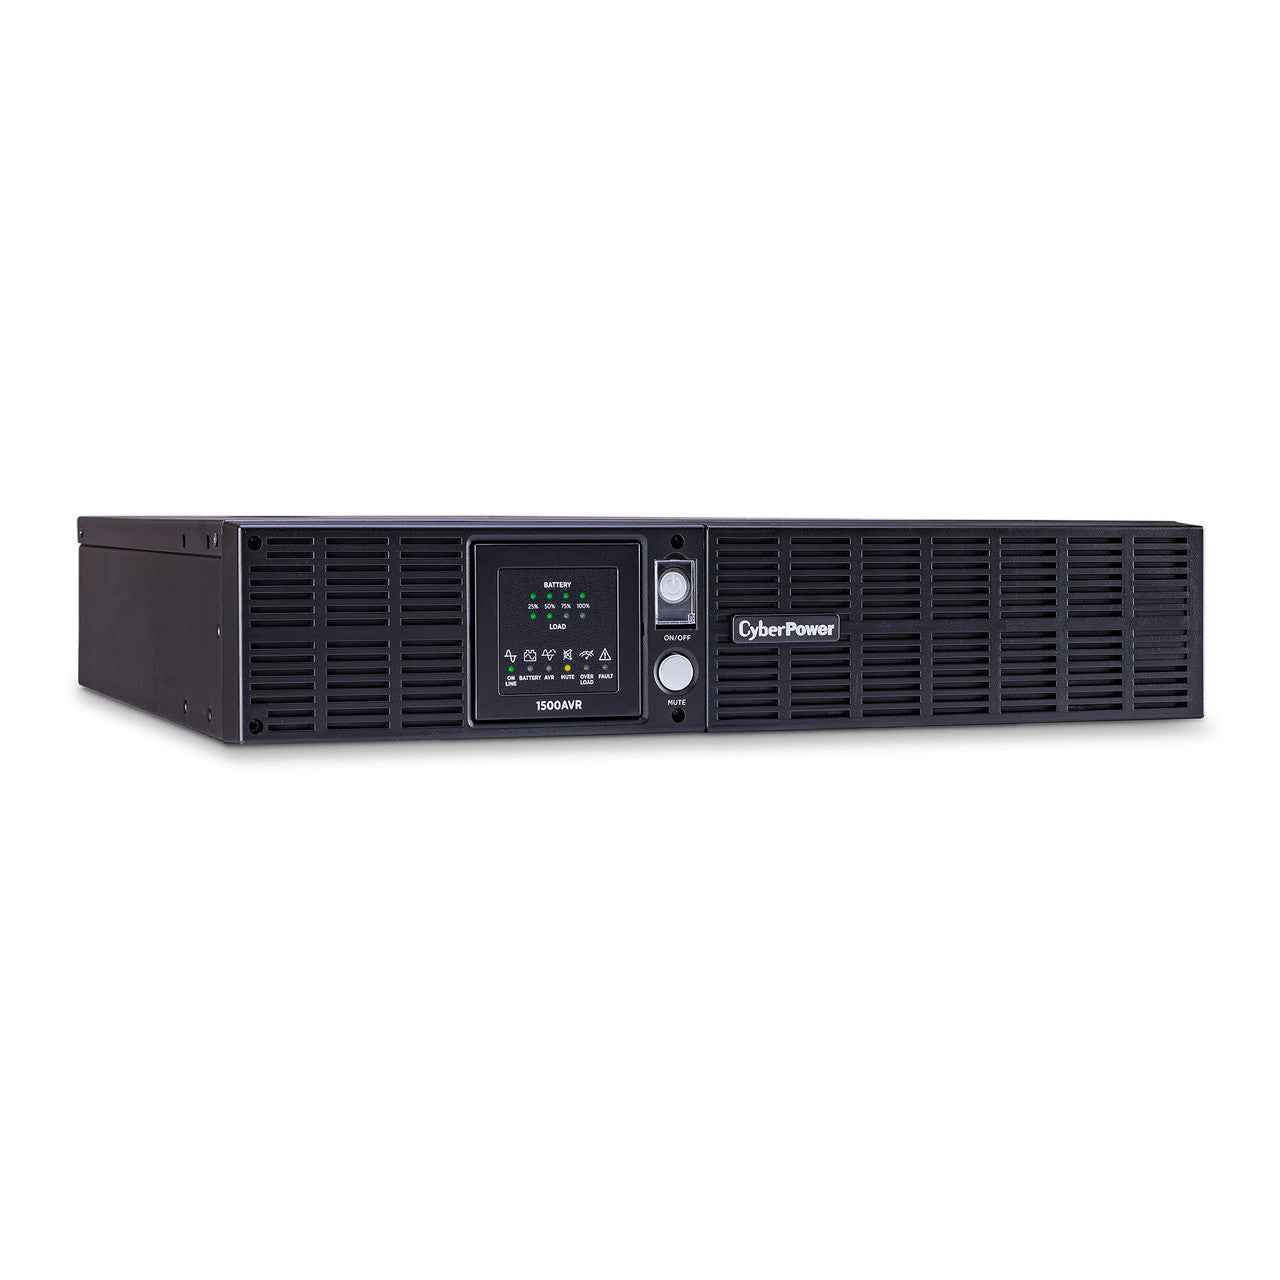 CyberPower CPS1500AVR CyberPower 1500VA/900W Line-Interactive Rackmount UPS 8 Outlets